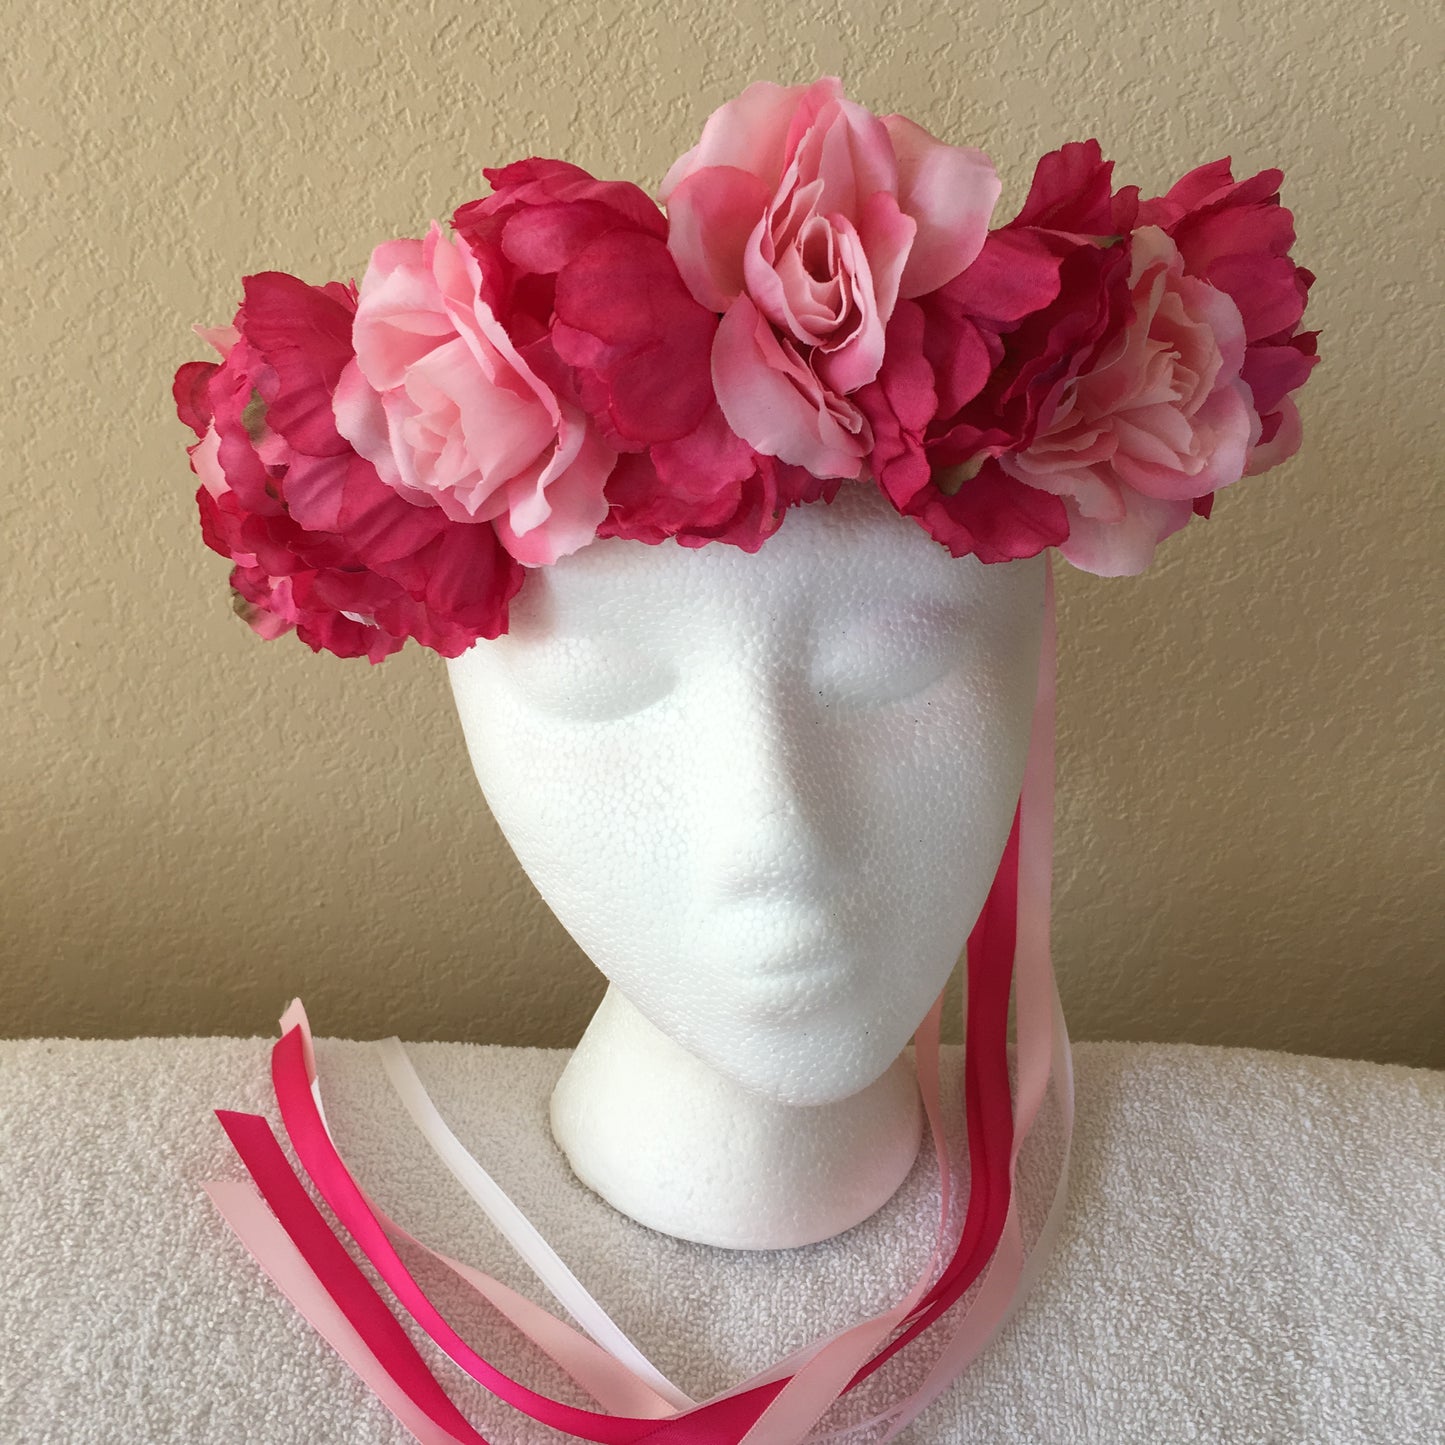 Large Wreath - Bright pink flowers w/ pink & white roses